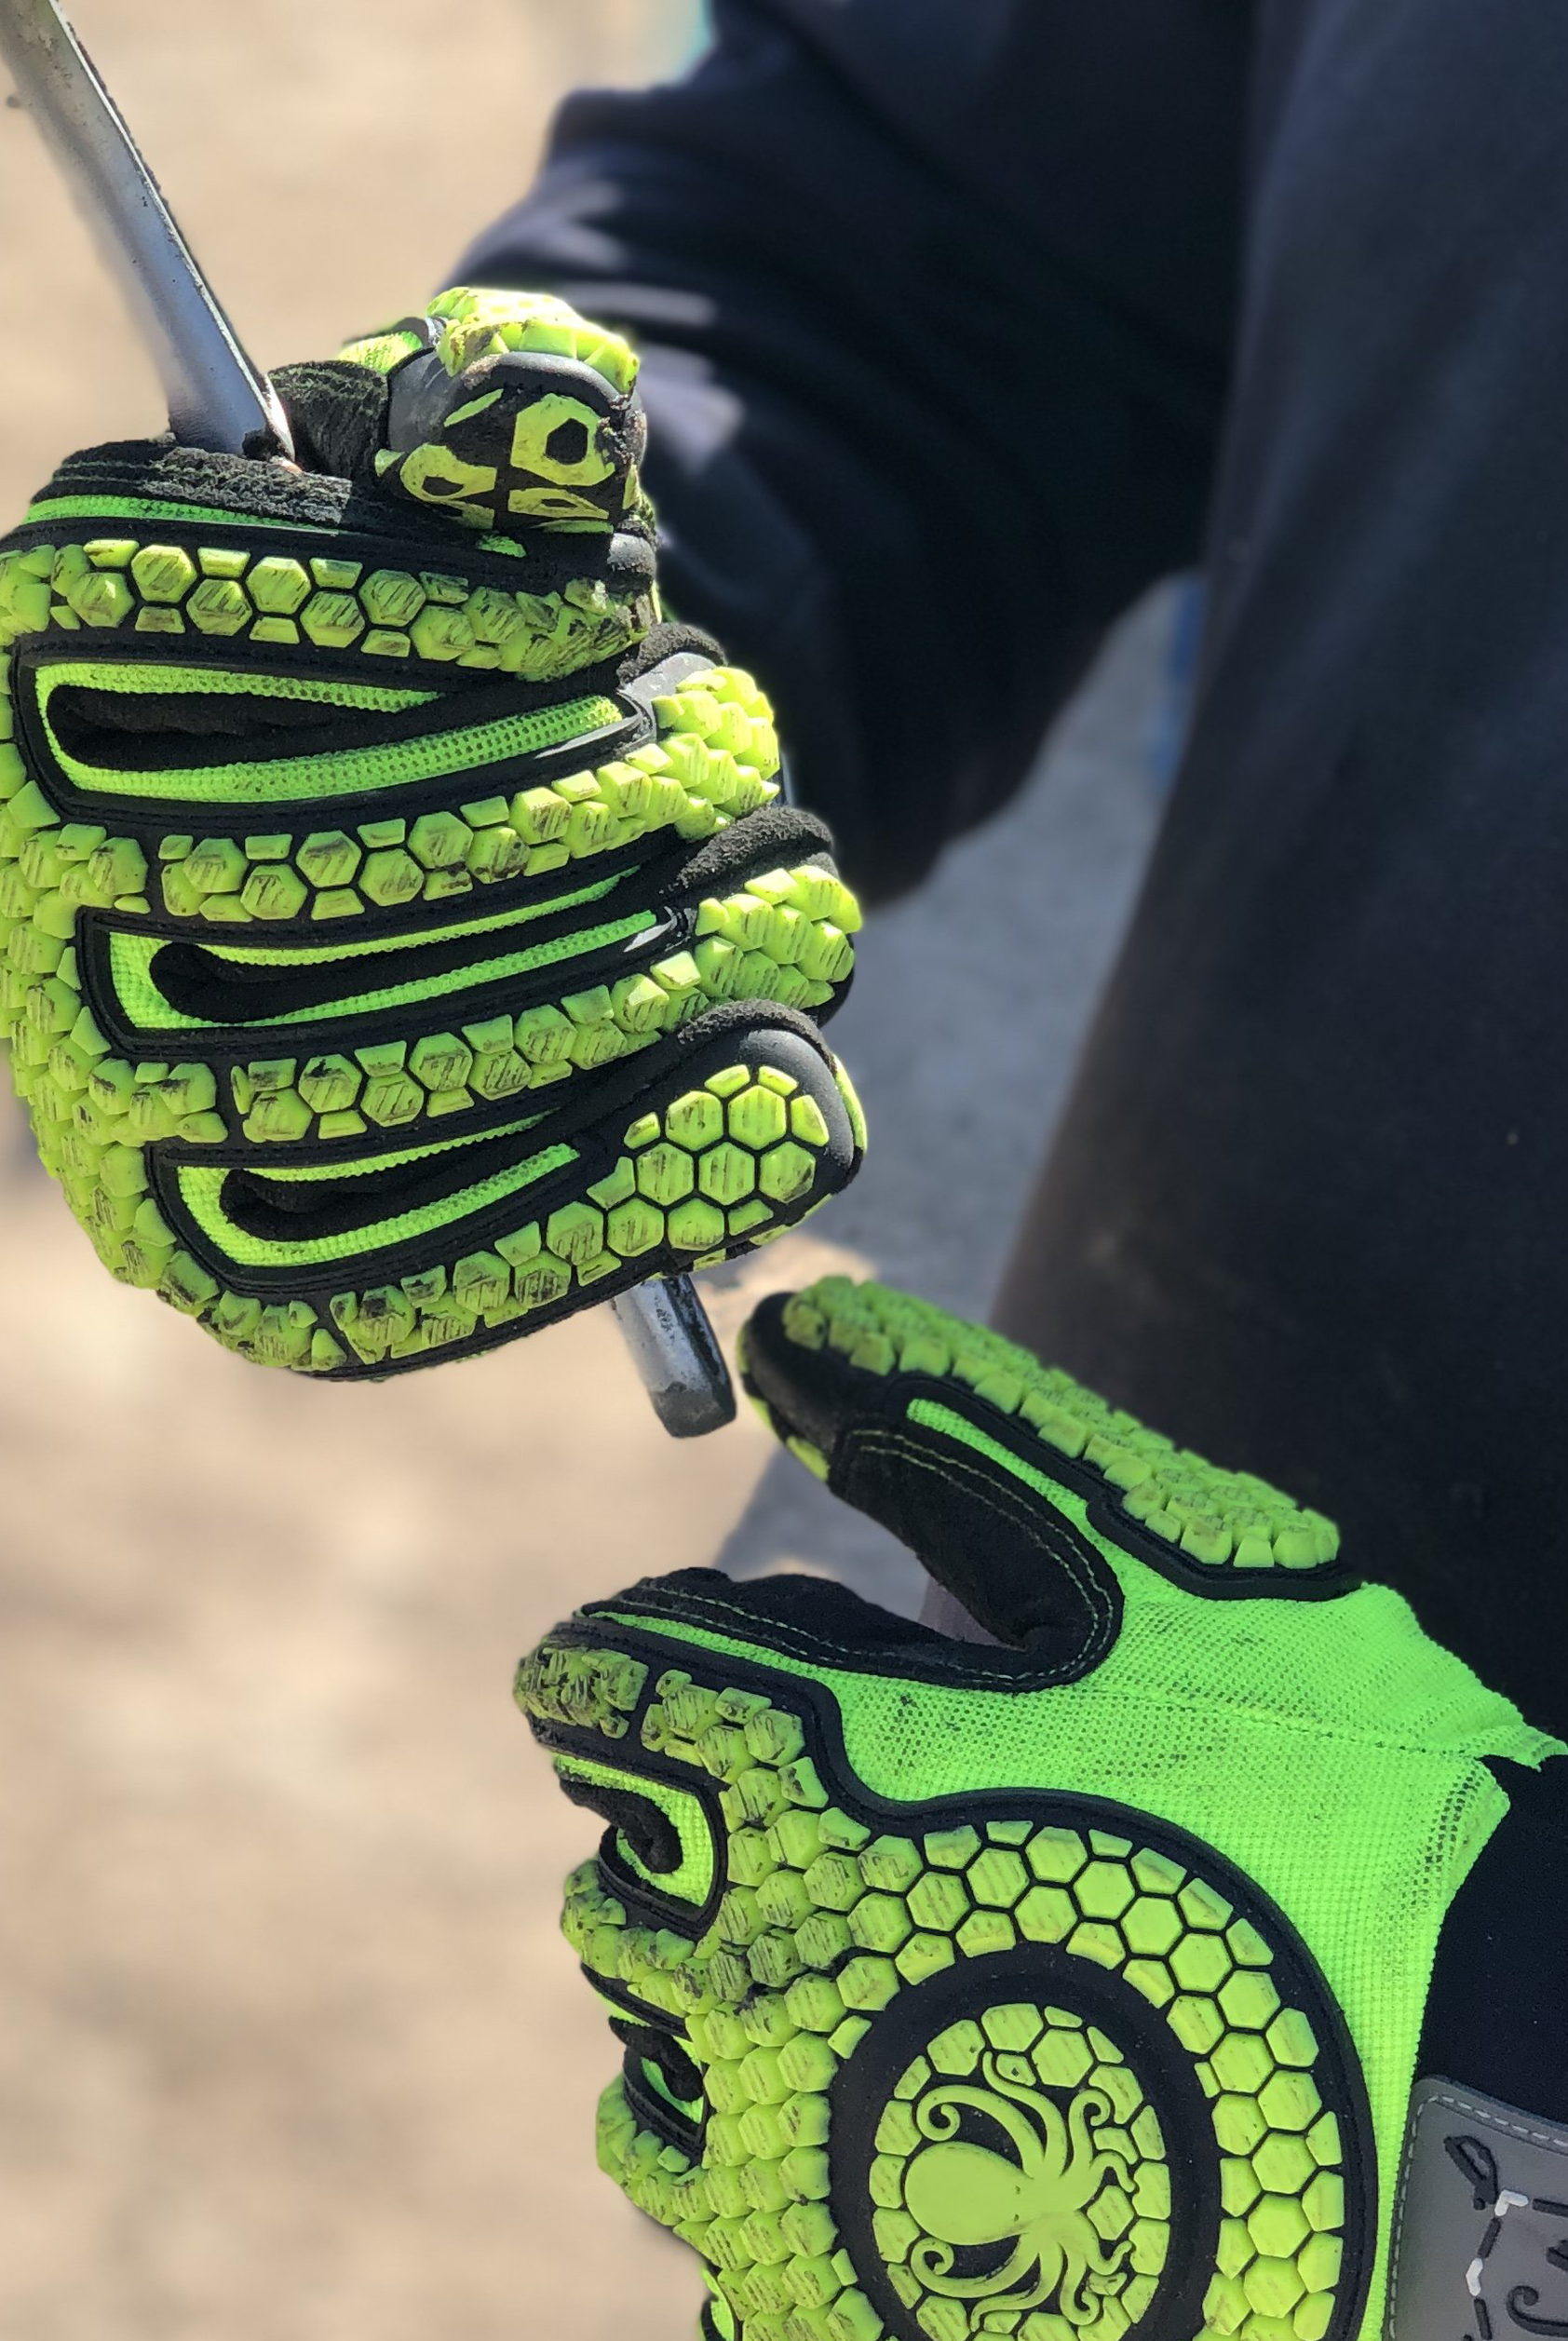 Safety Impact Gloves-Octo8 - L4 FR Clothing